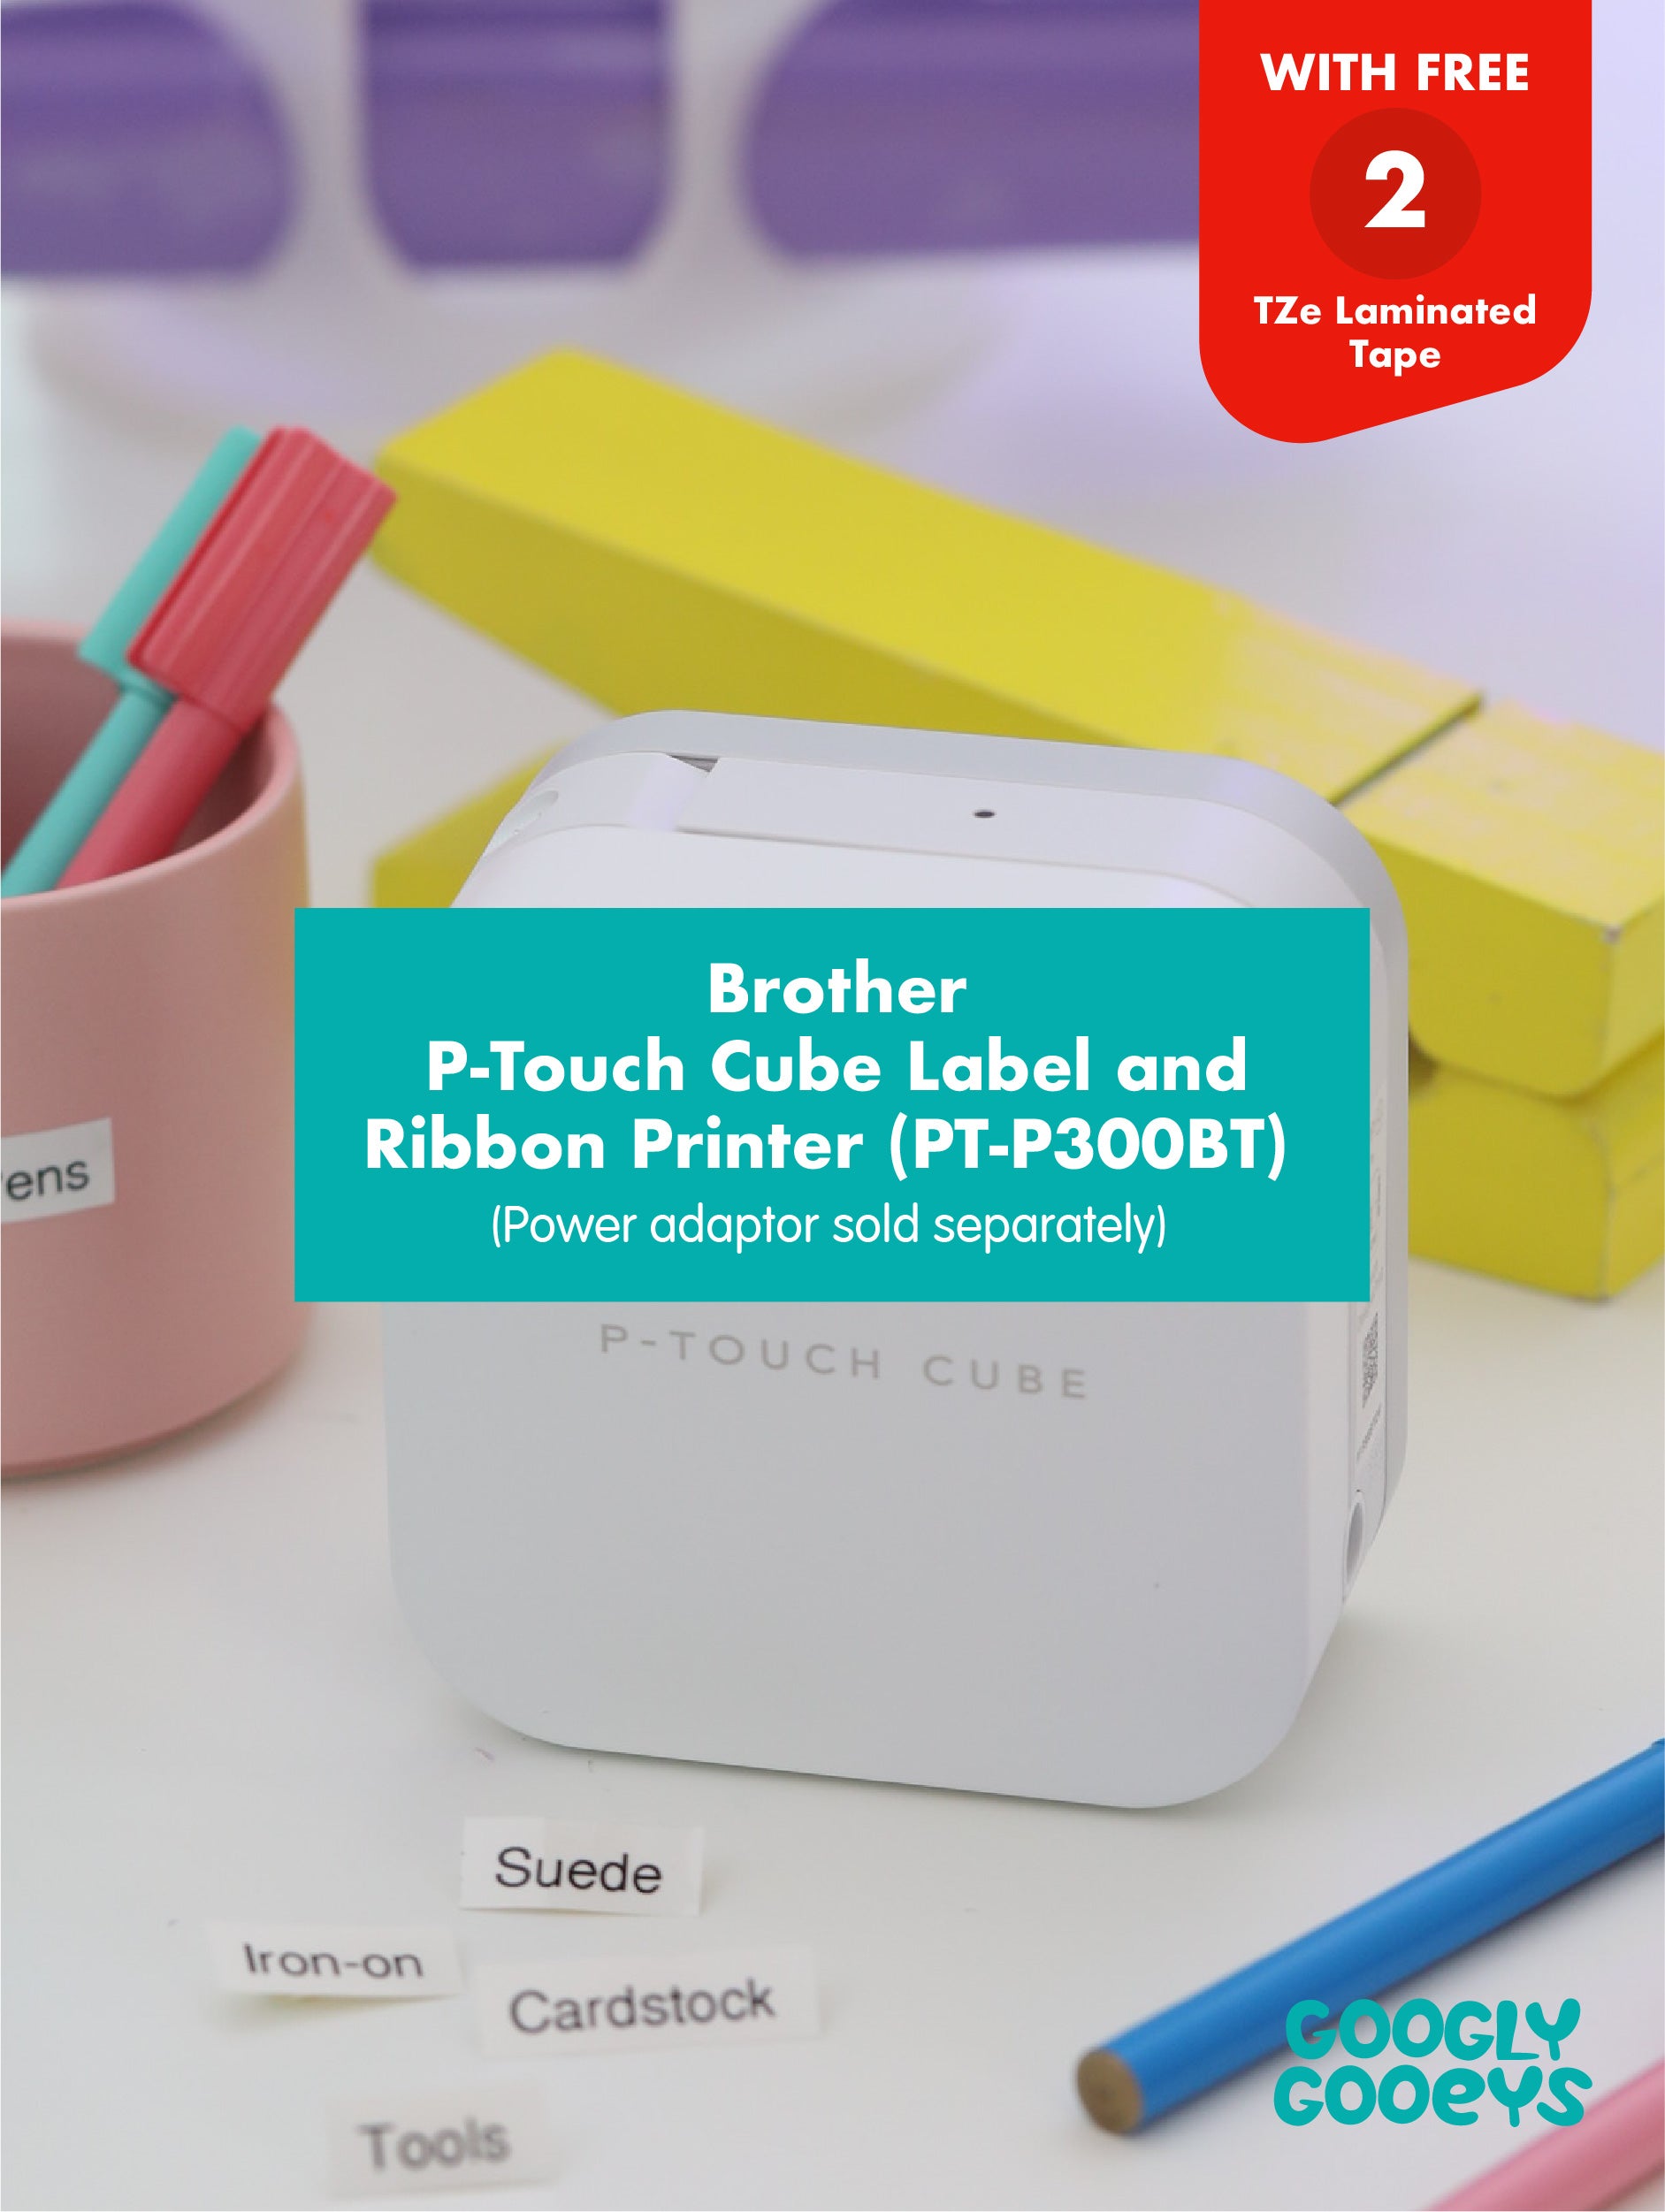 Brother P-Touch Cube Label and Ribbons Printer PT-P300BT